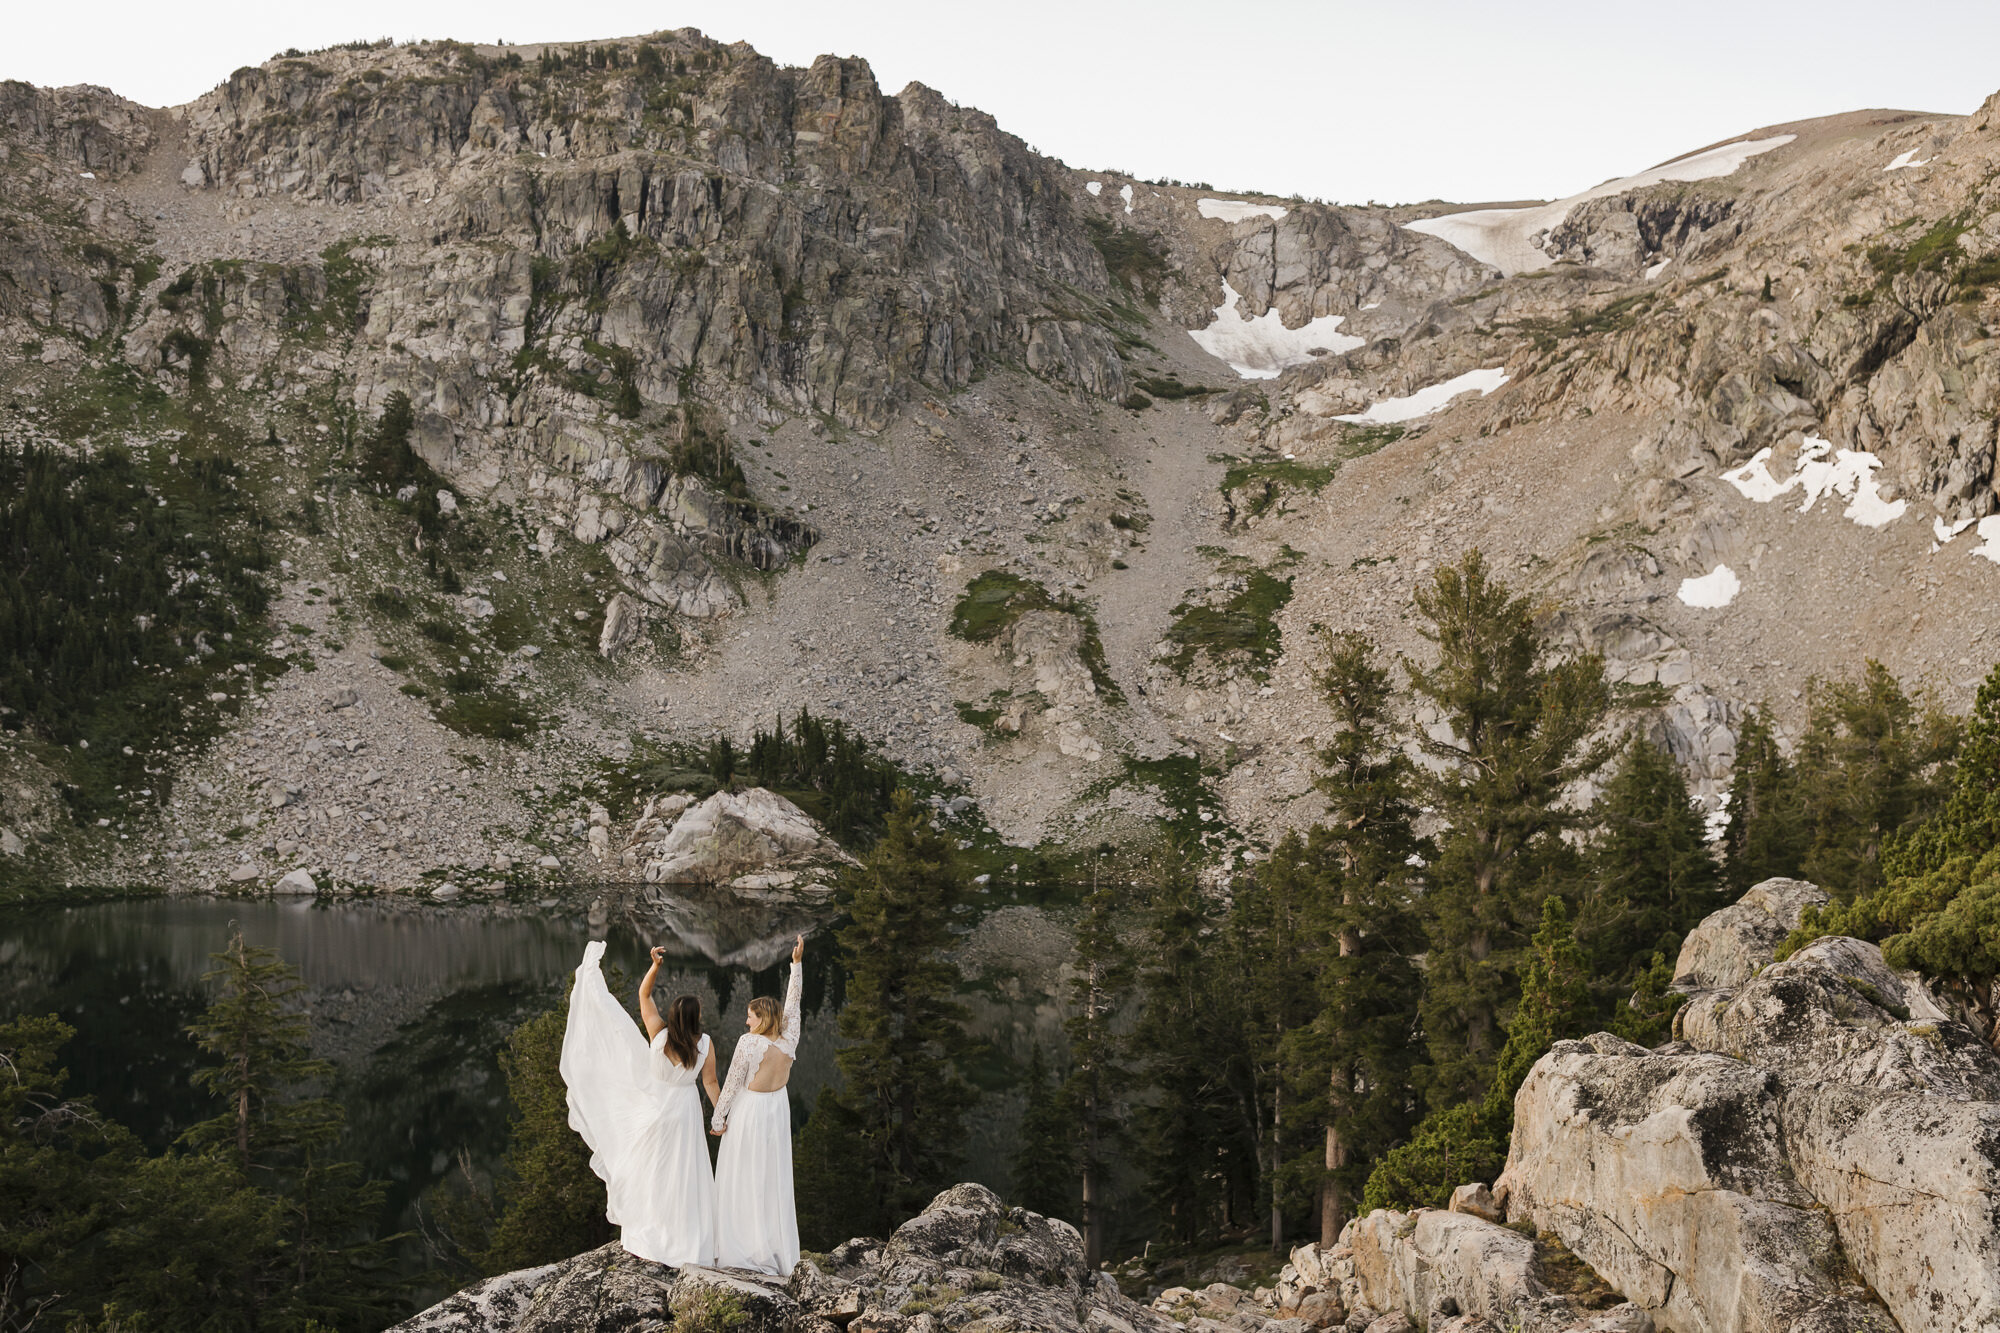 Two brides celebrate their marriage in the California mountains, wedding dress flying in the wind